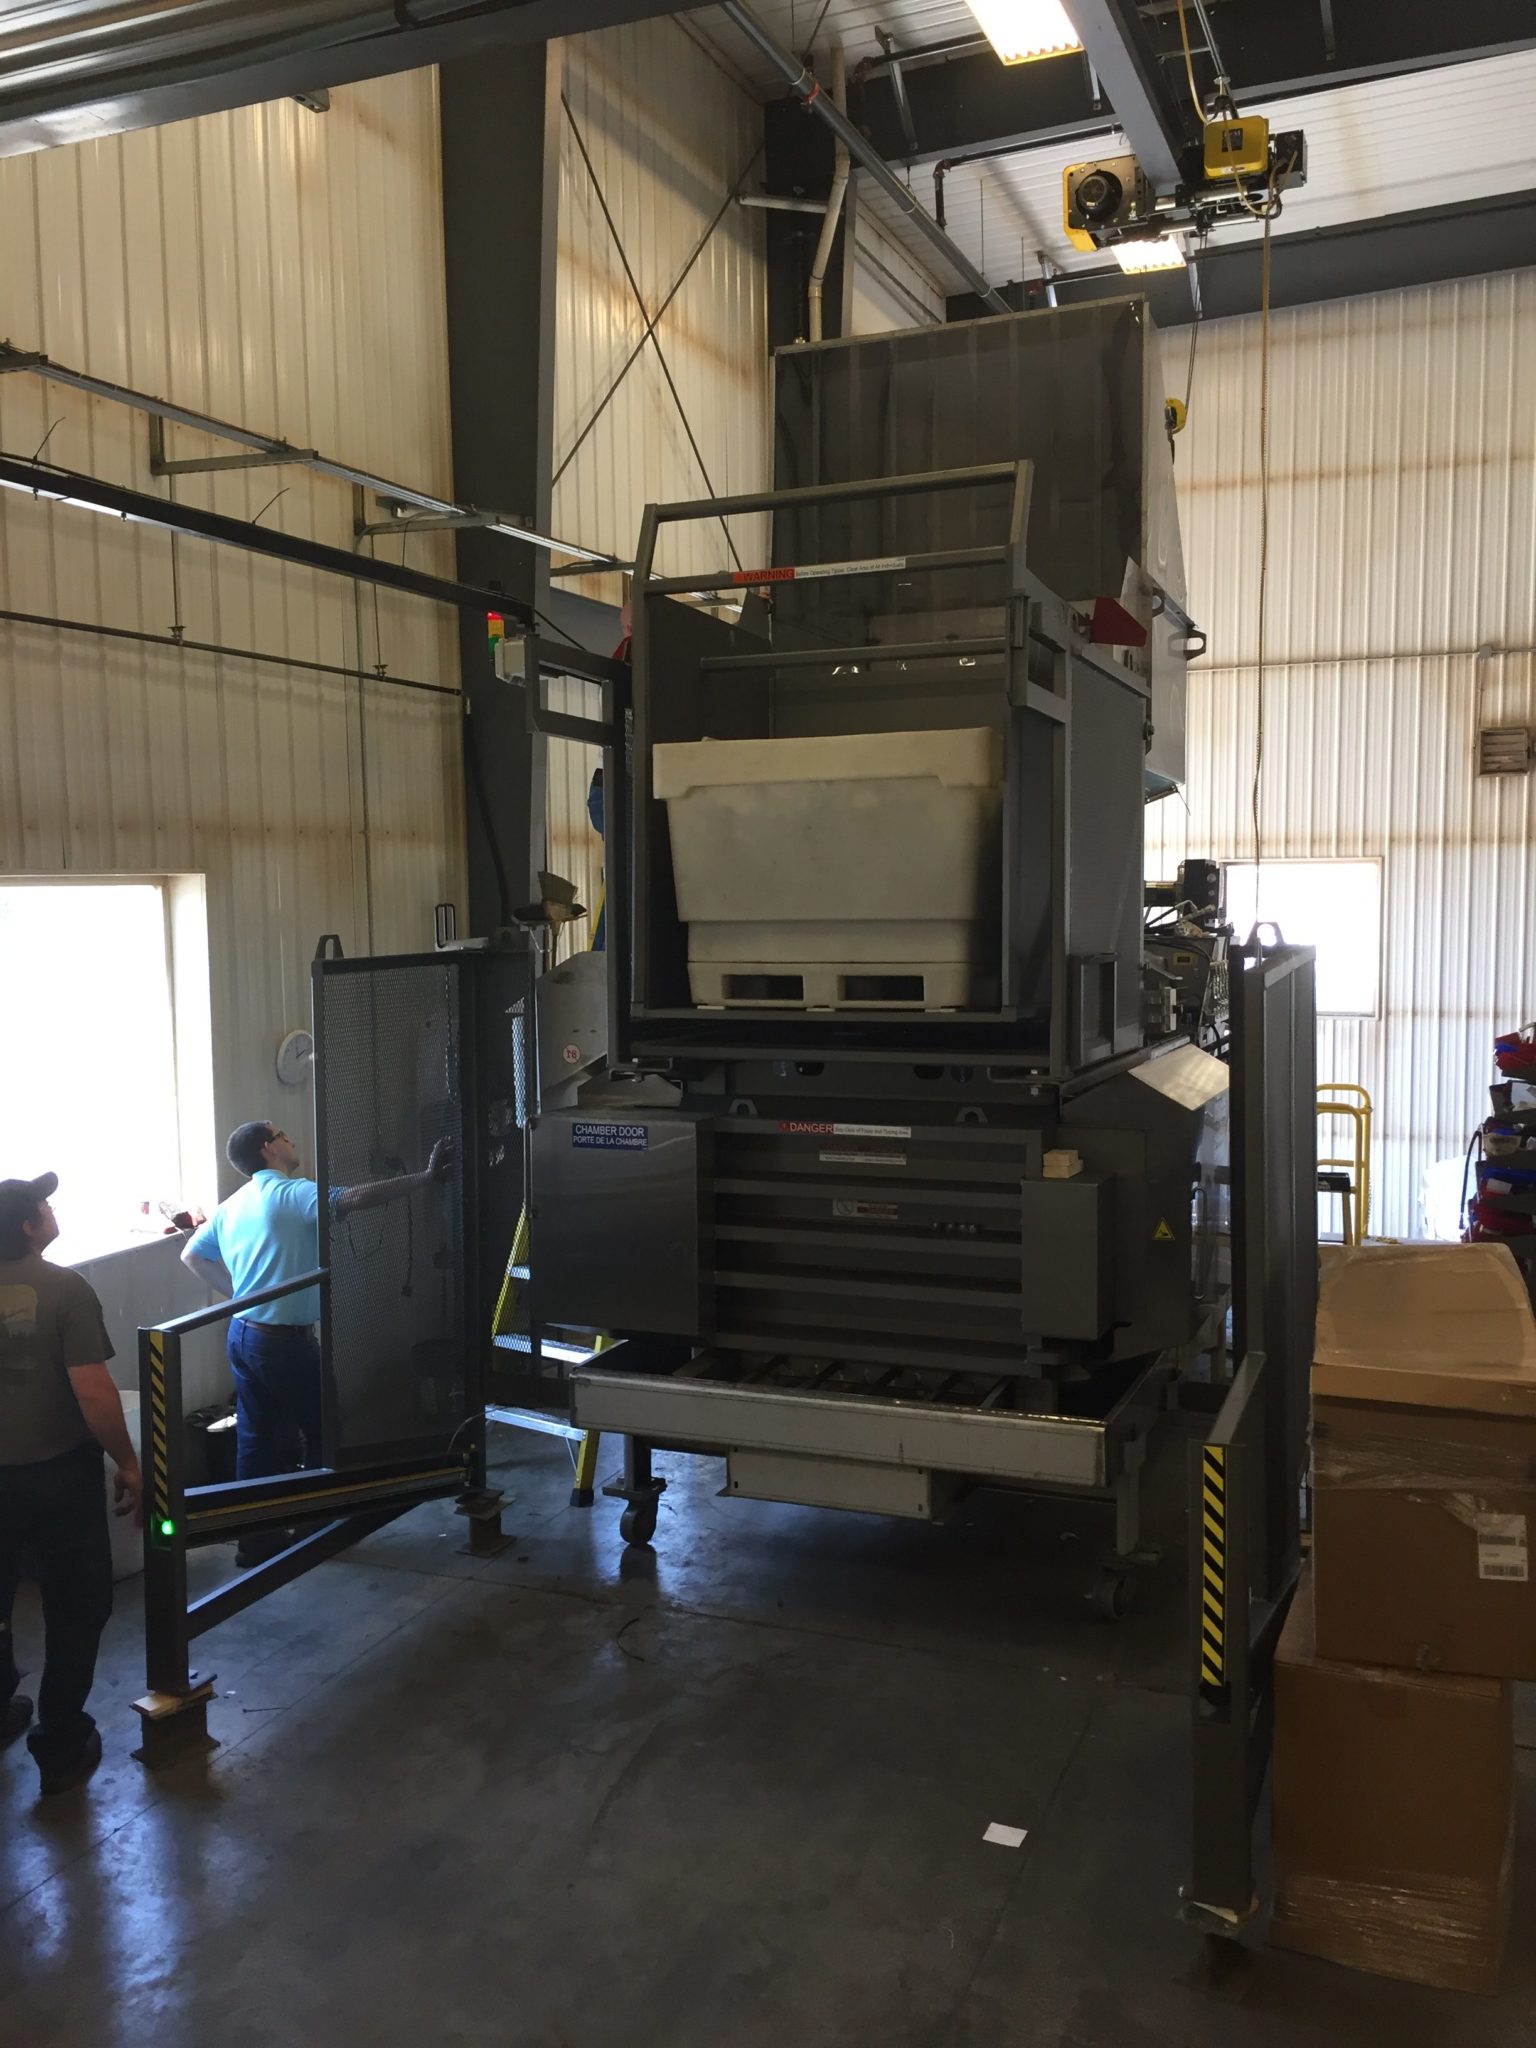 Harmony's engineering, production, sales, and marketing teams all take part in our quality control testing of our GEN 2 balers